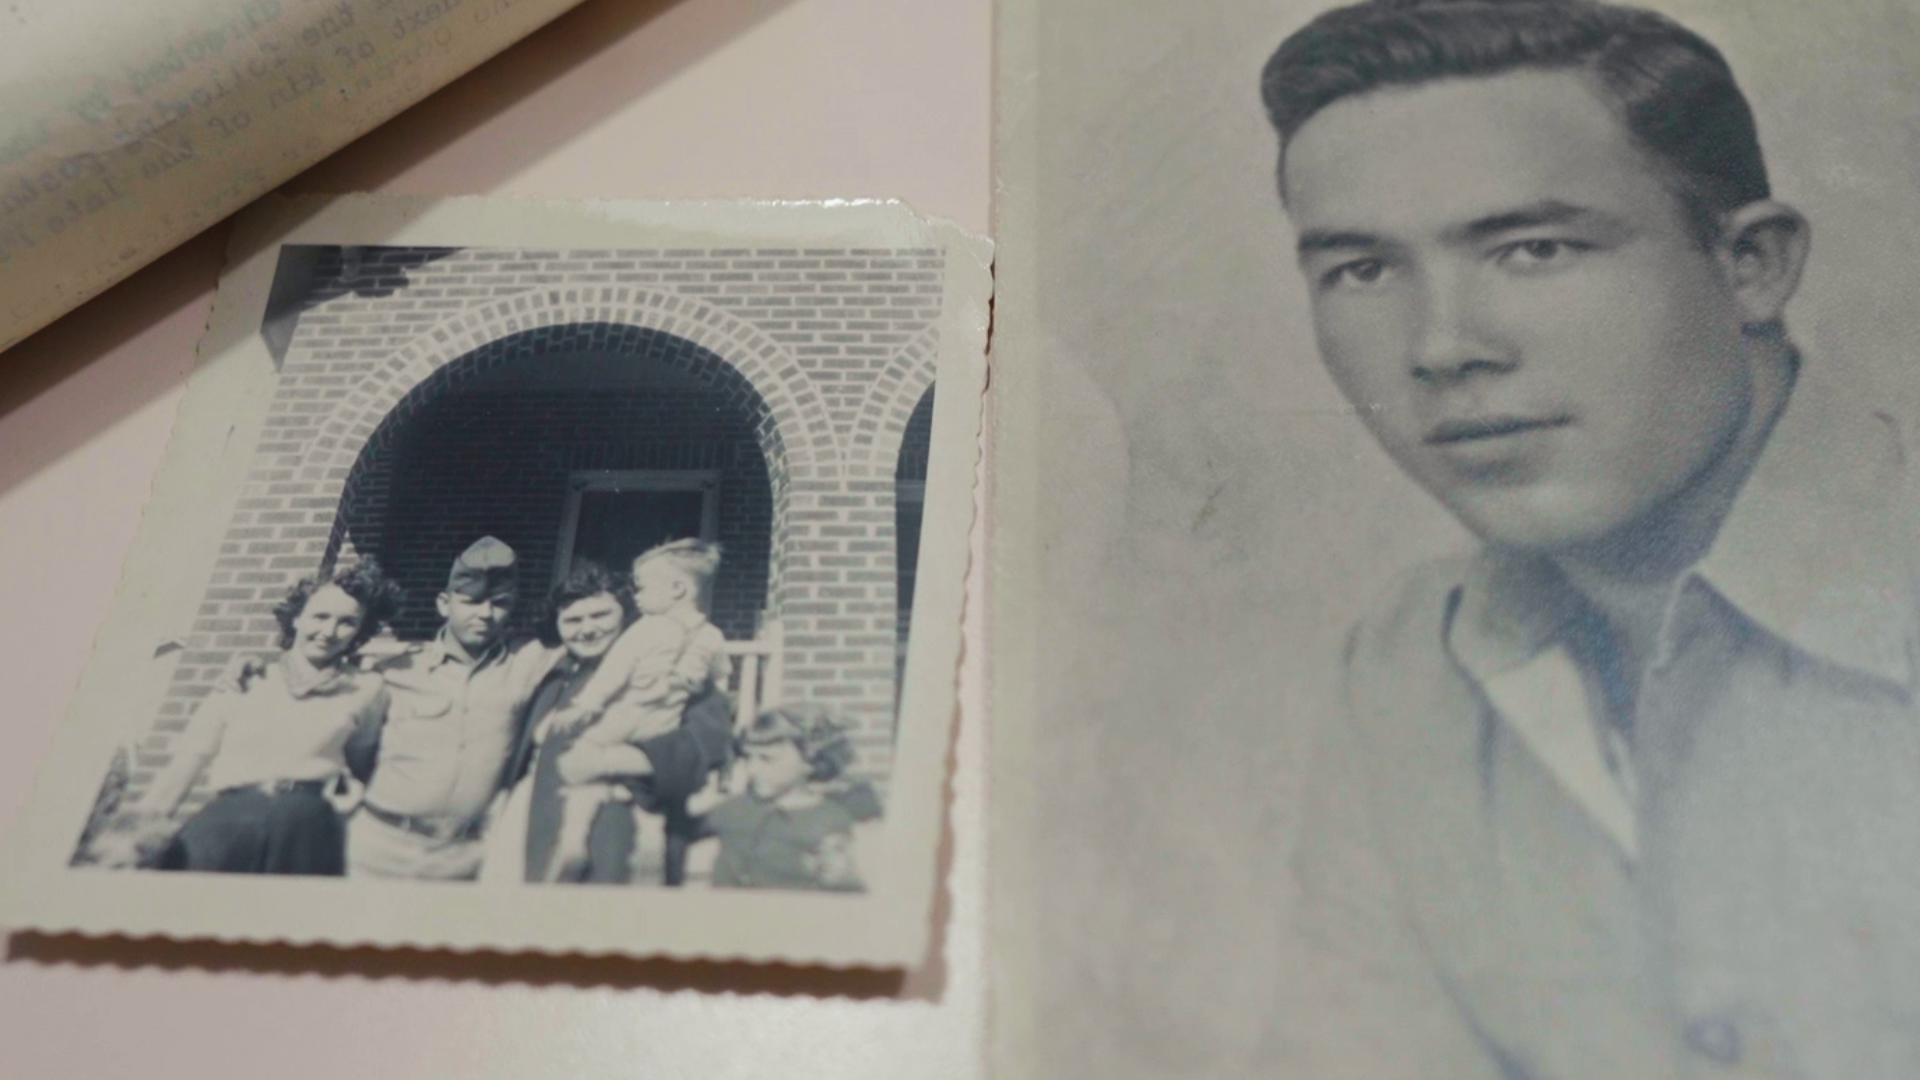 Marine Corps repatriation unit solves longtime mystery about 18-year-old who died during Battle of Saipan, returns remains to family of WTOL investigative reporter.